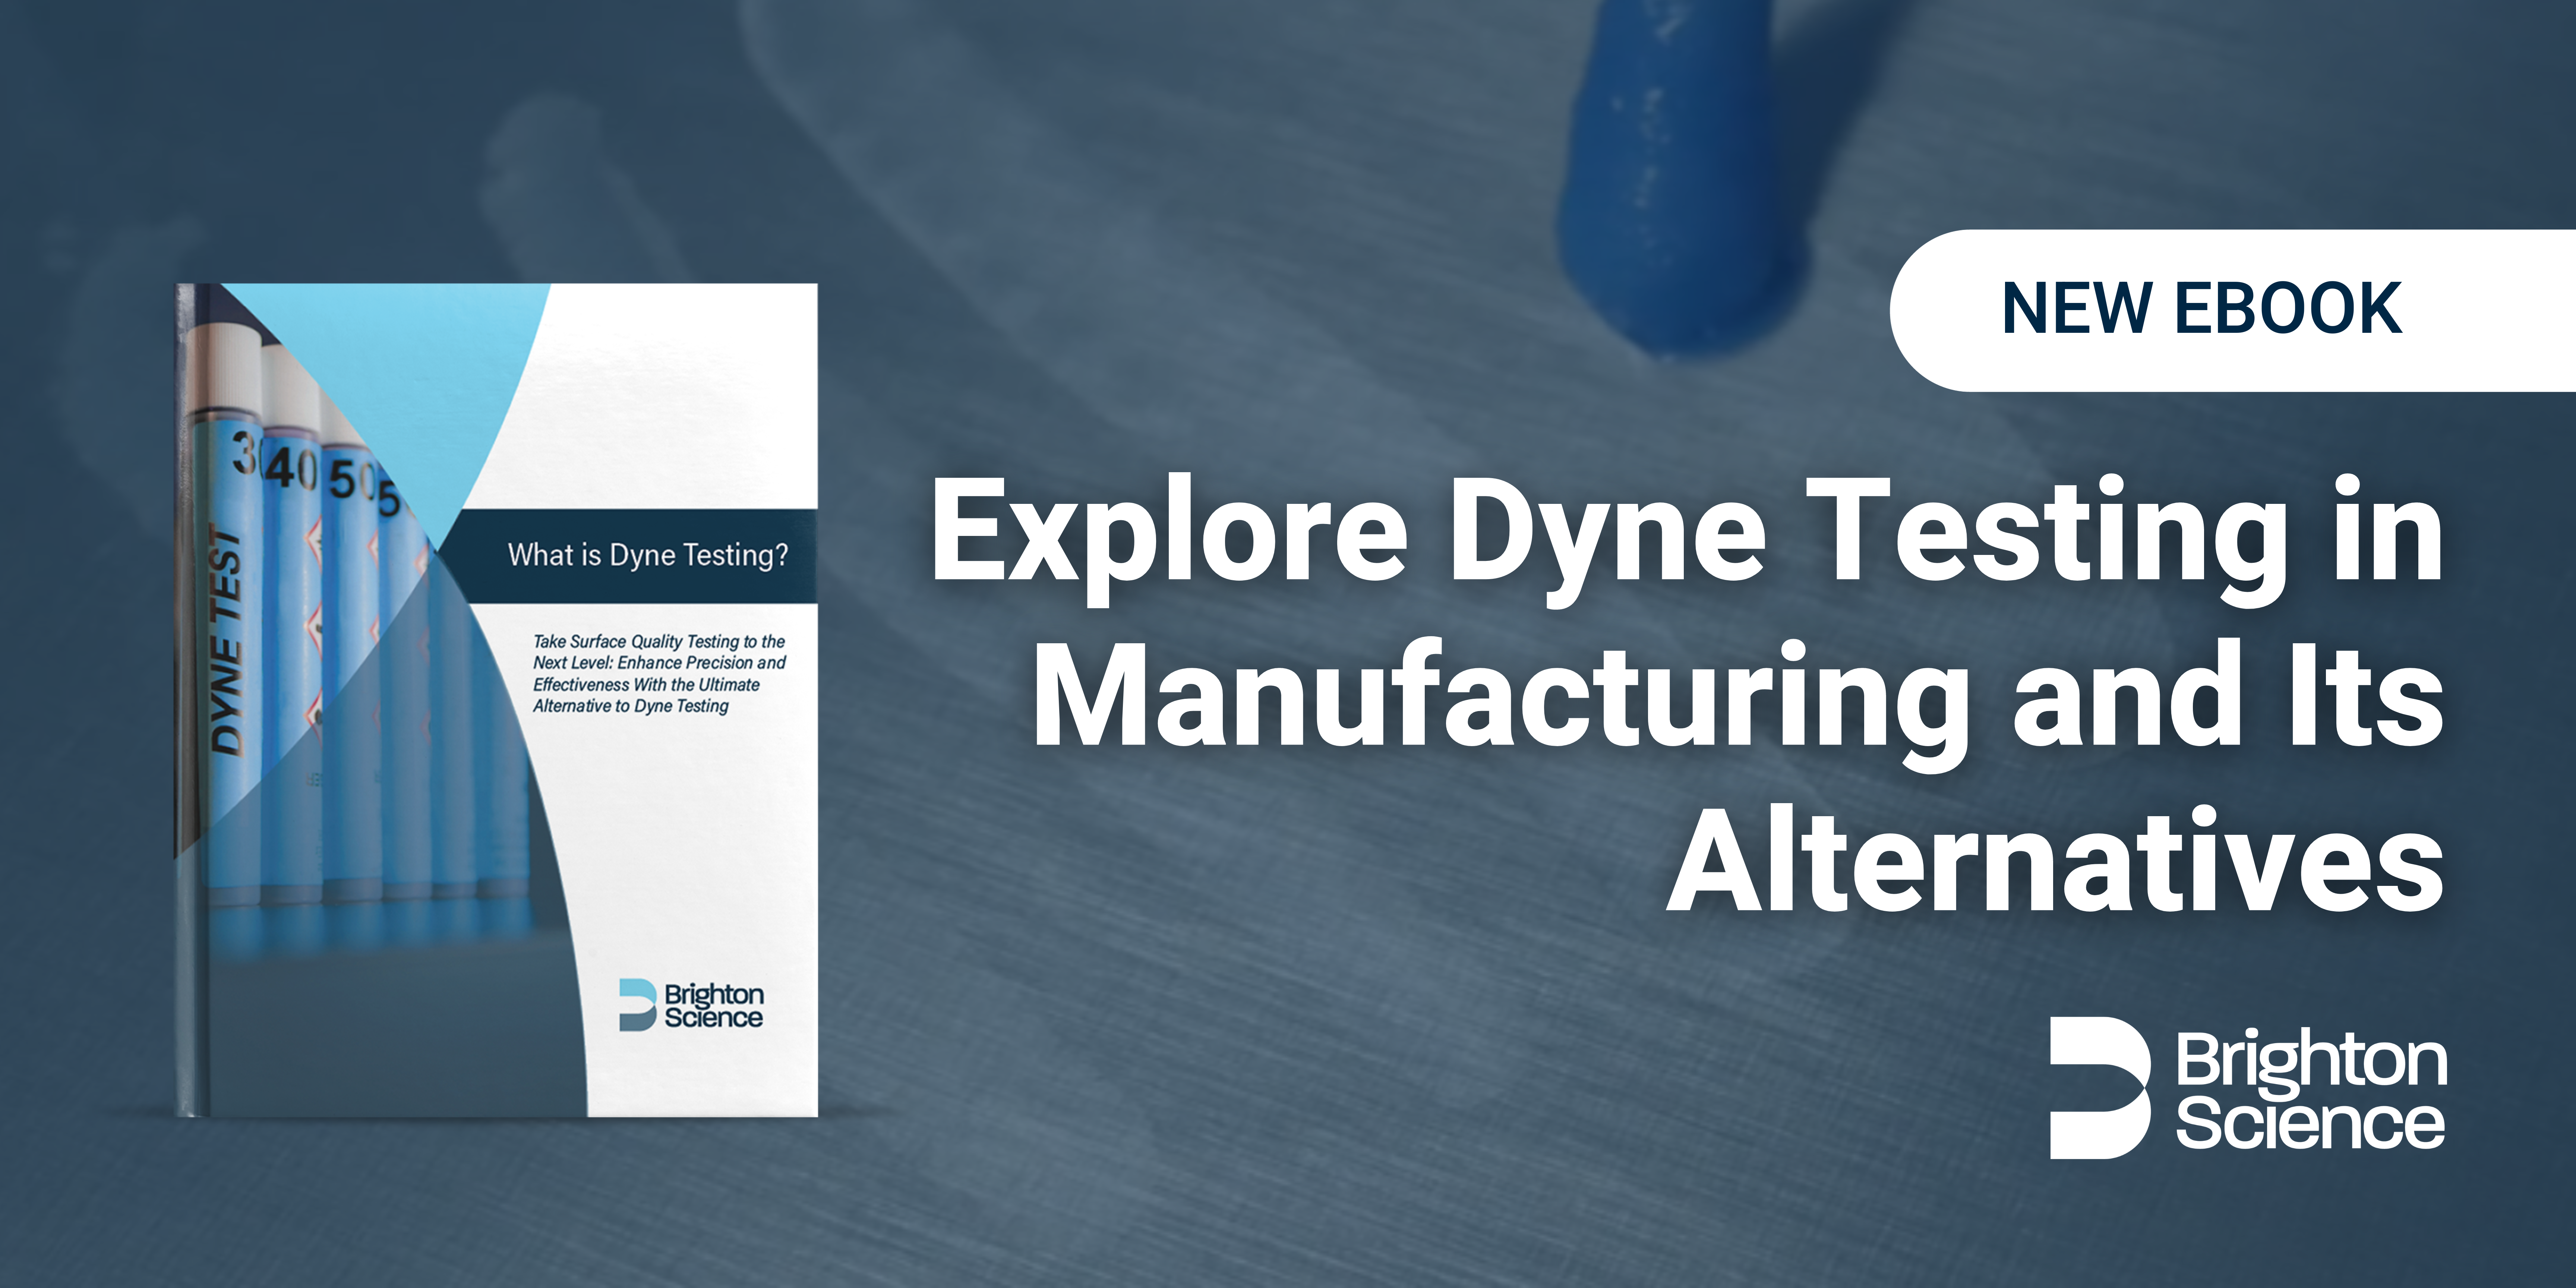 New eBook Explores Dyne Testing in Manufacturing and Its Alternatives